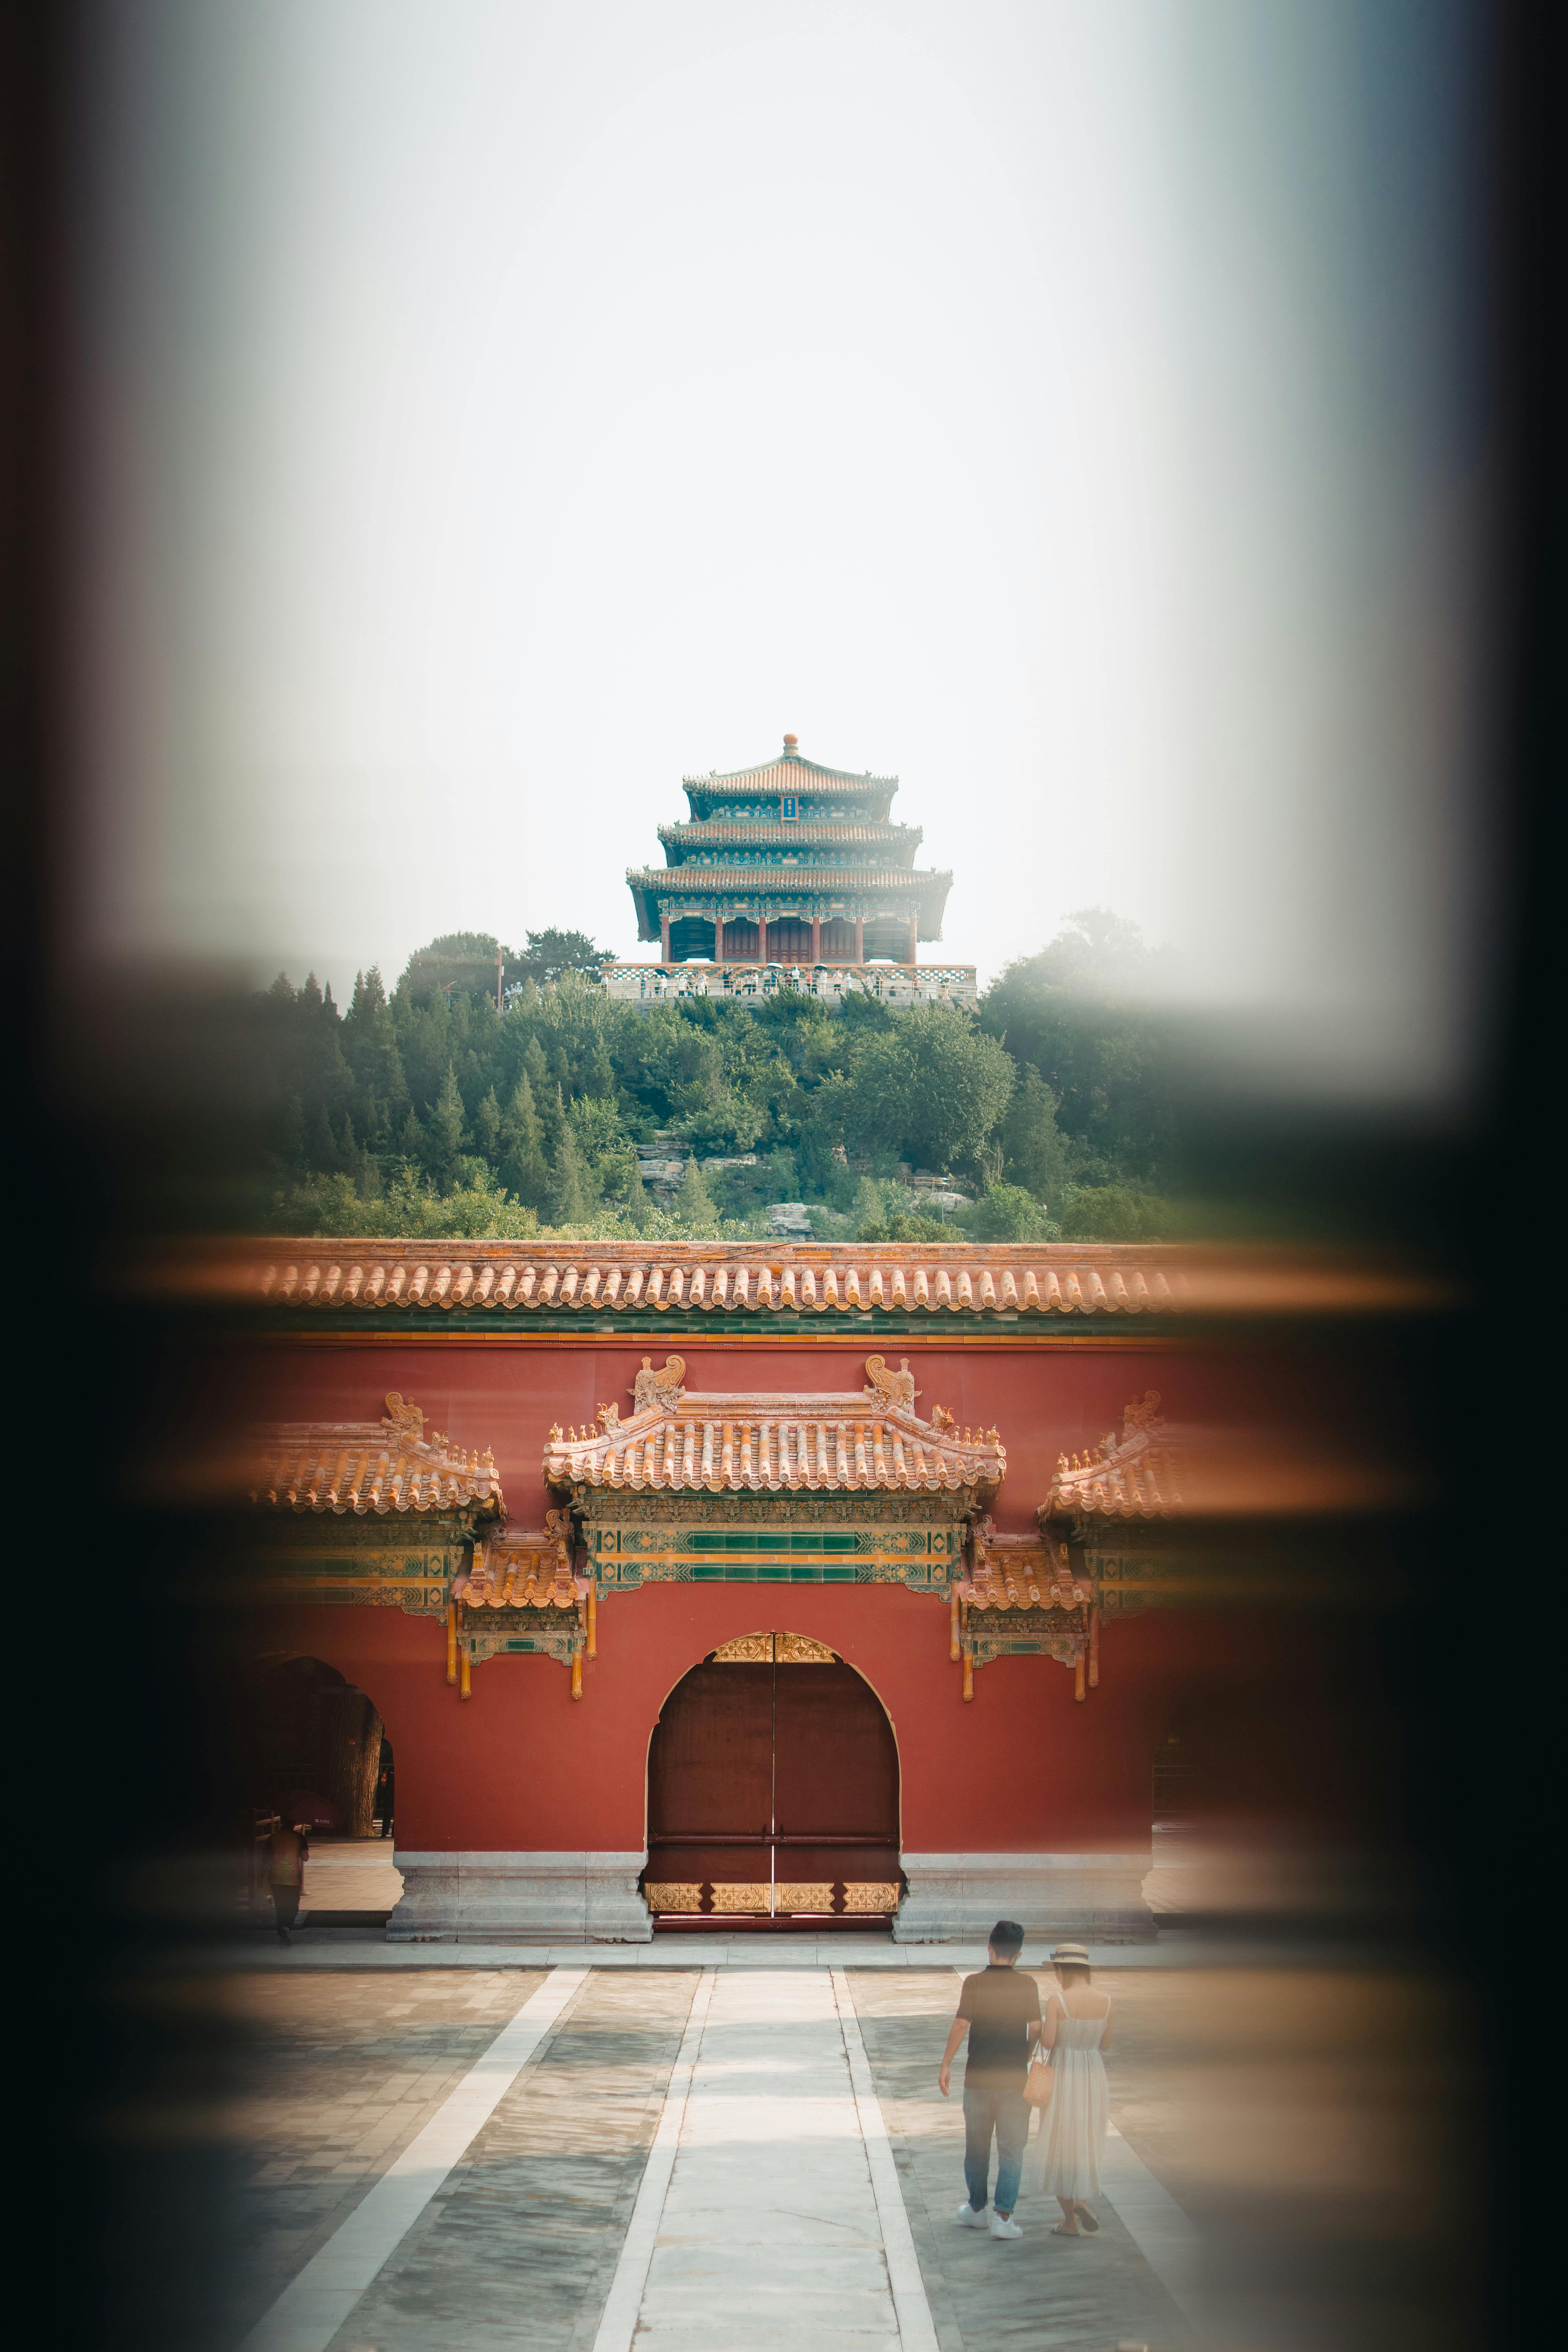 A couple is walking in the forbidden city - Chinese